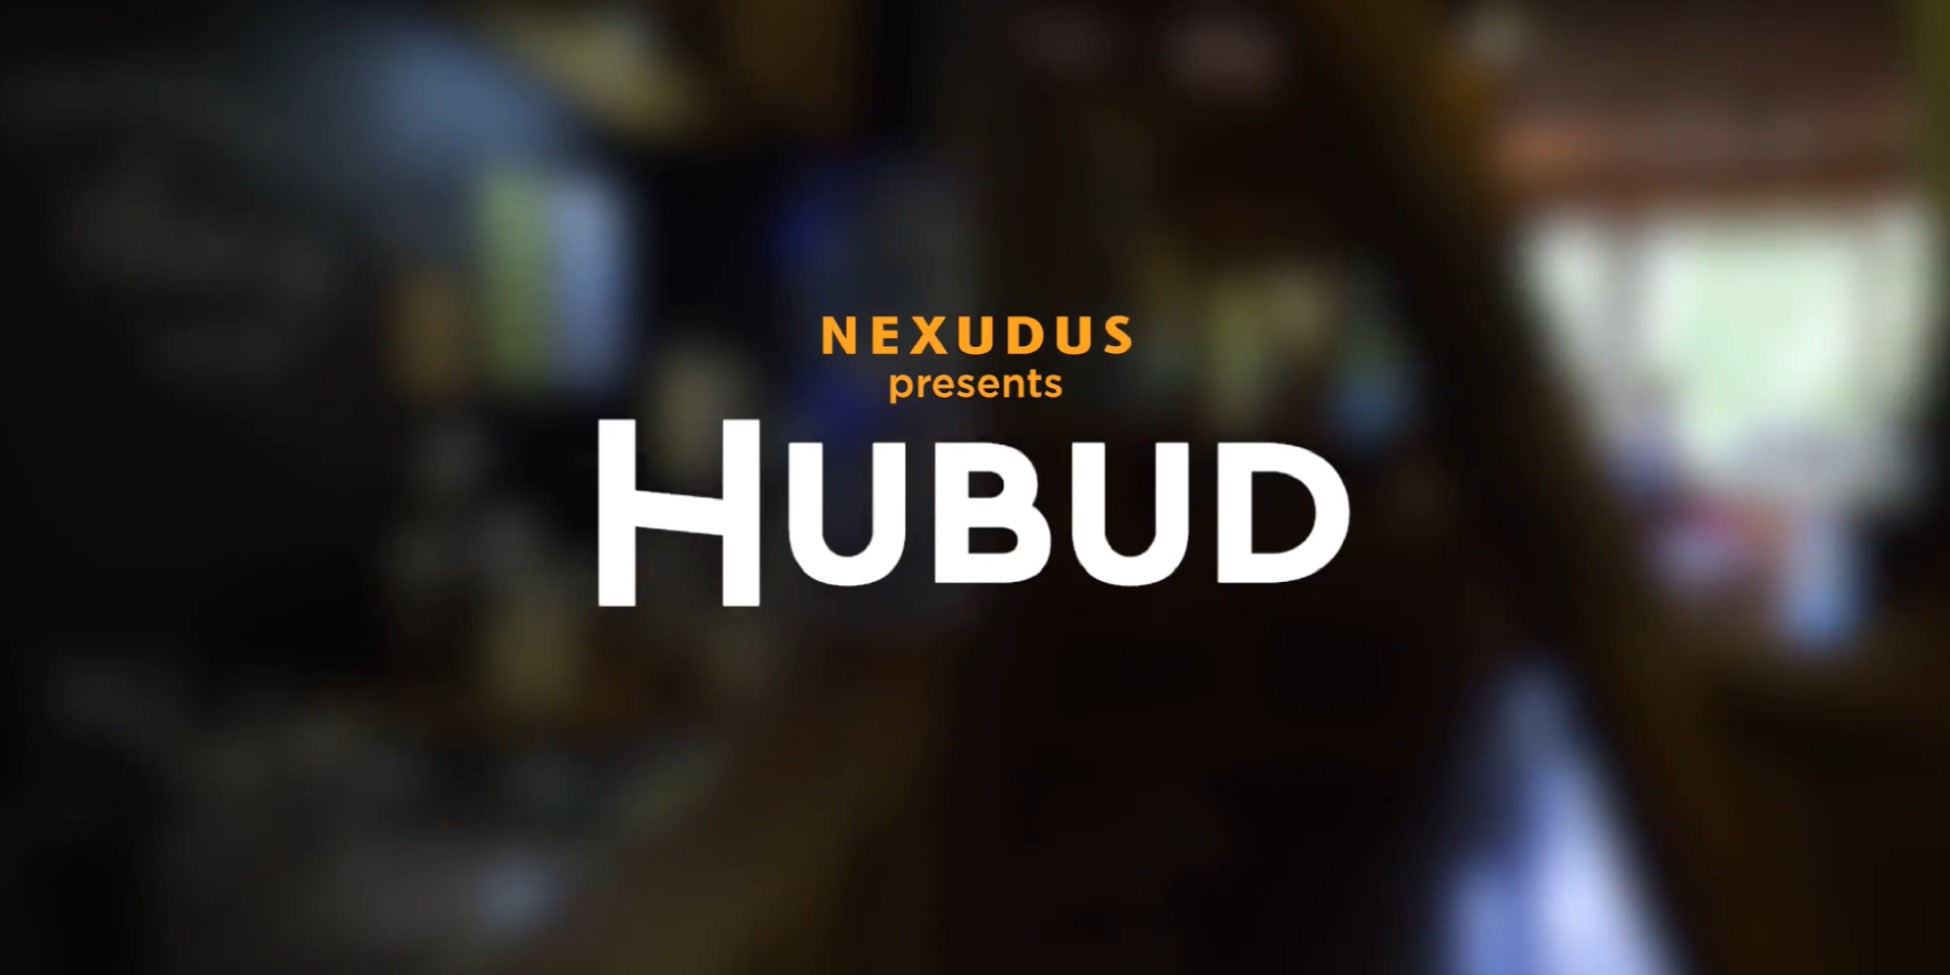 “Hubud is on a mission to change the way people live, work and learn"